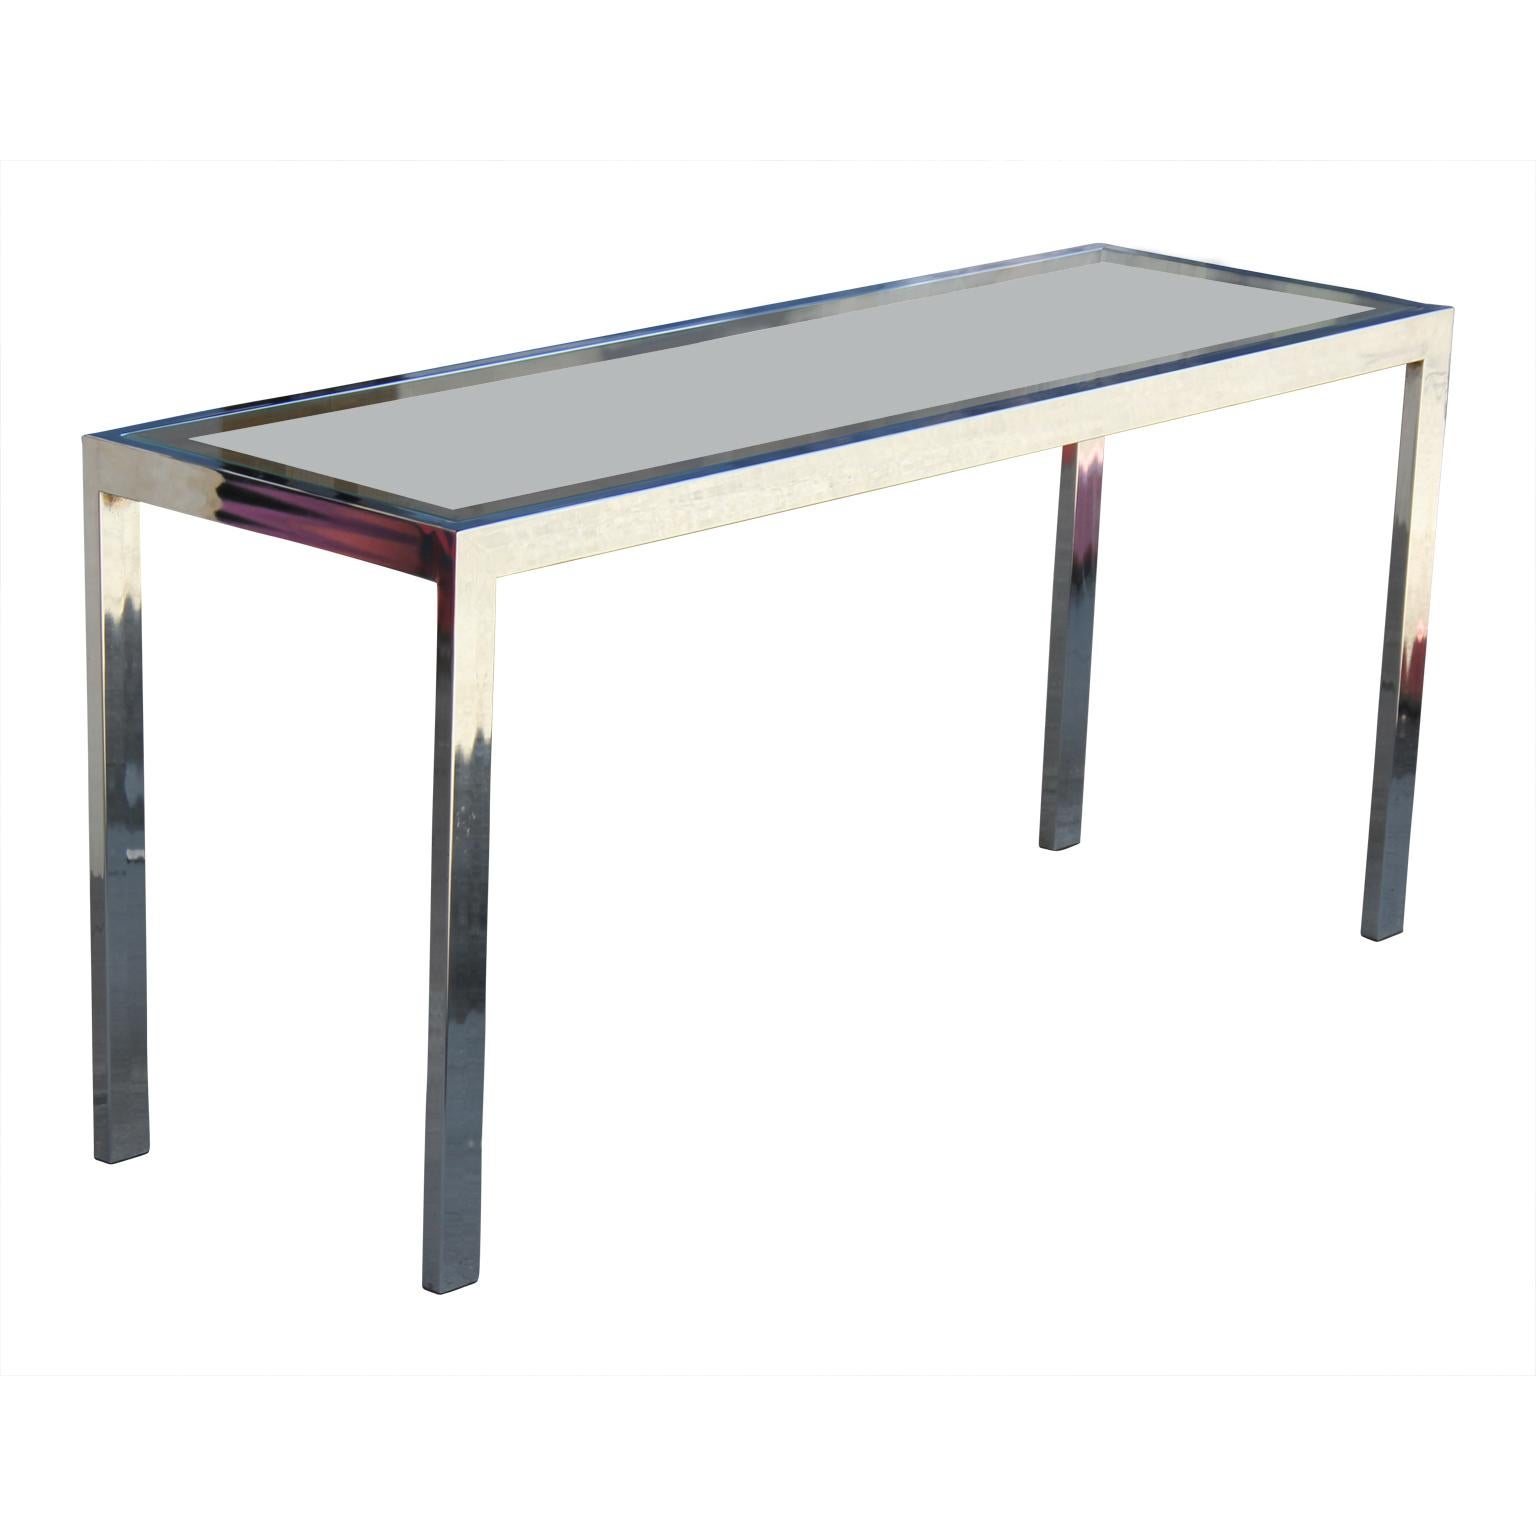 Gorgeous Milo Baughman for Thayer Coggin Style Mid-Century Modern console or sofa table made with a chrome frame and a glass top with cane underneath. Parson's style.